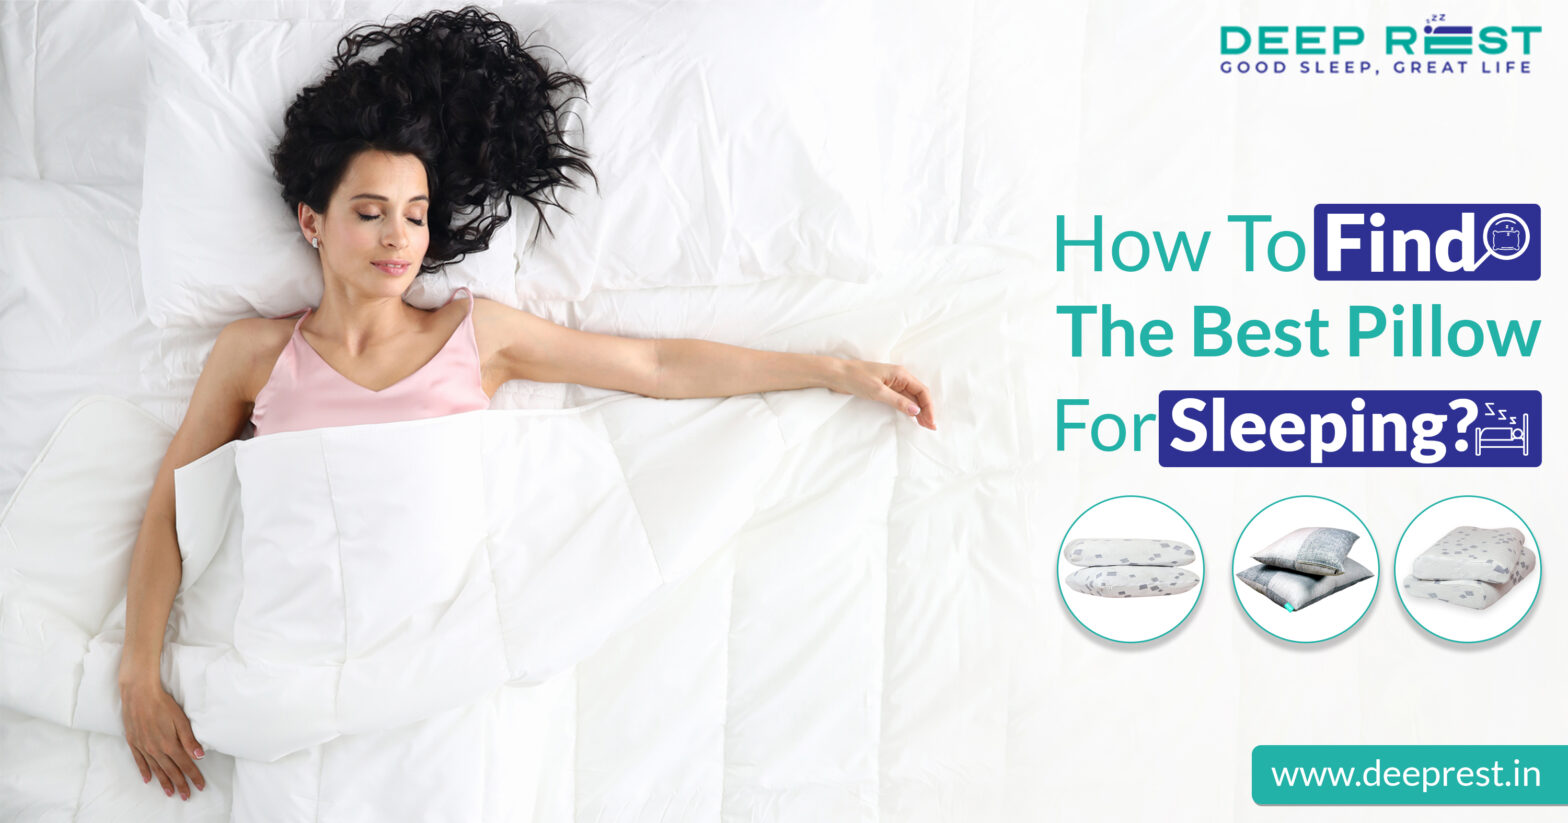 How to find the best pillow for sleeping